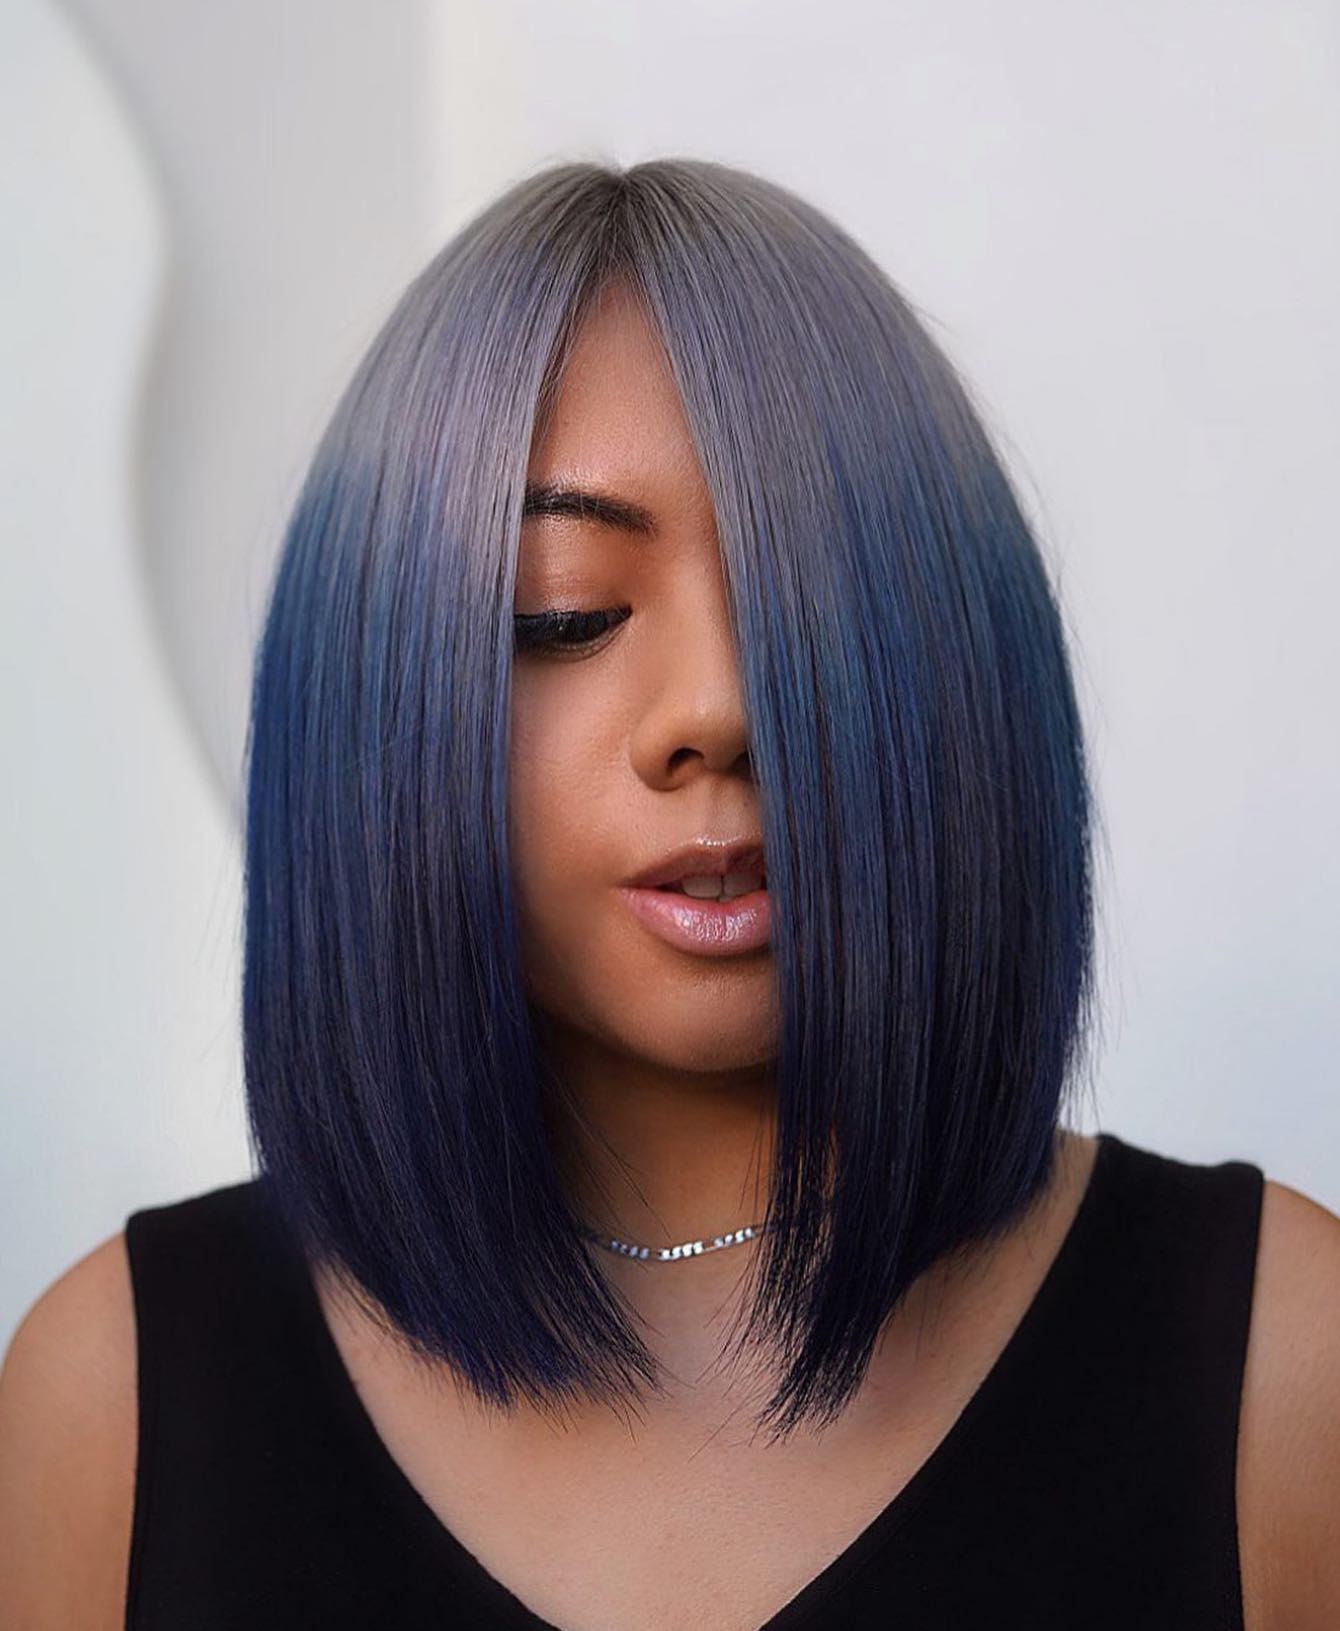 41 Bold and Beautiful Blue Ombre Hair Color Ideas  StayGlam